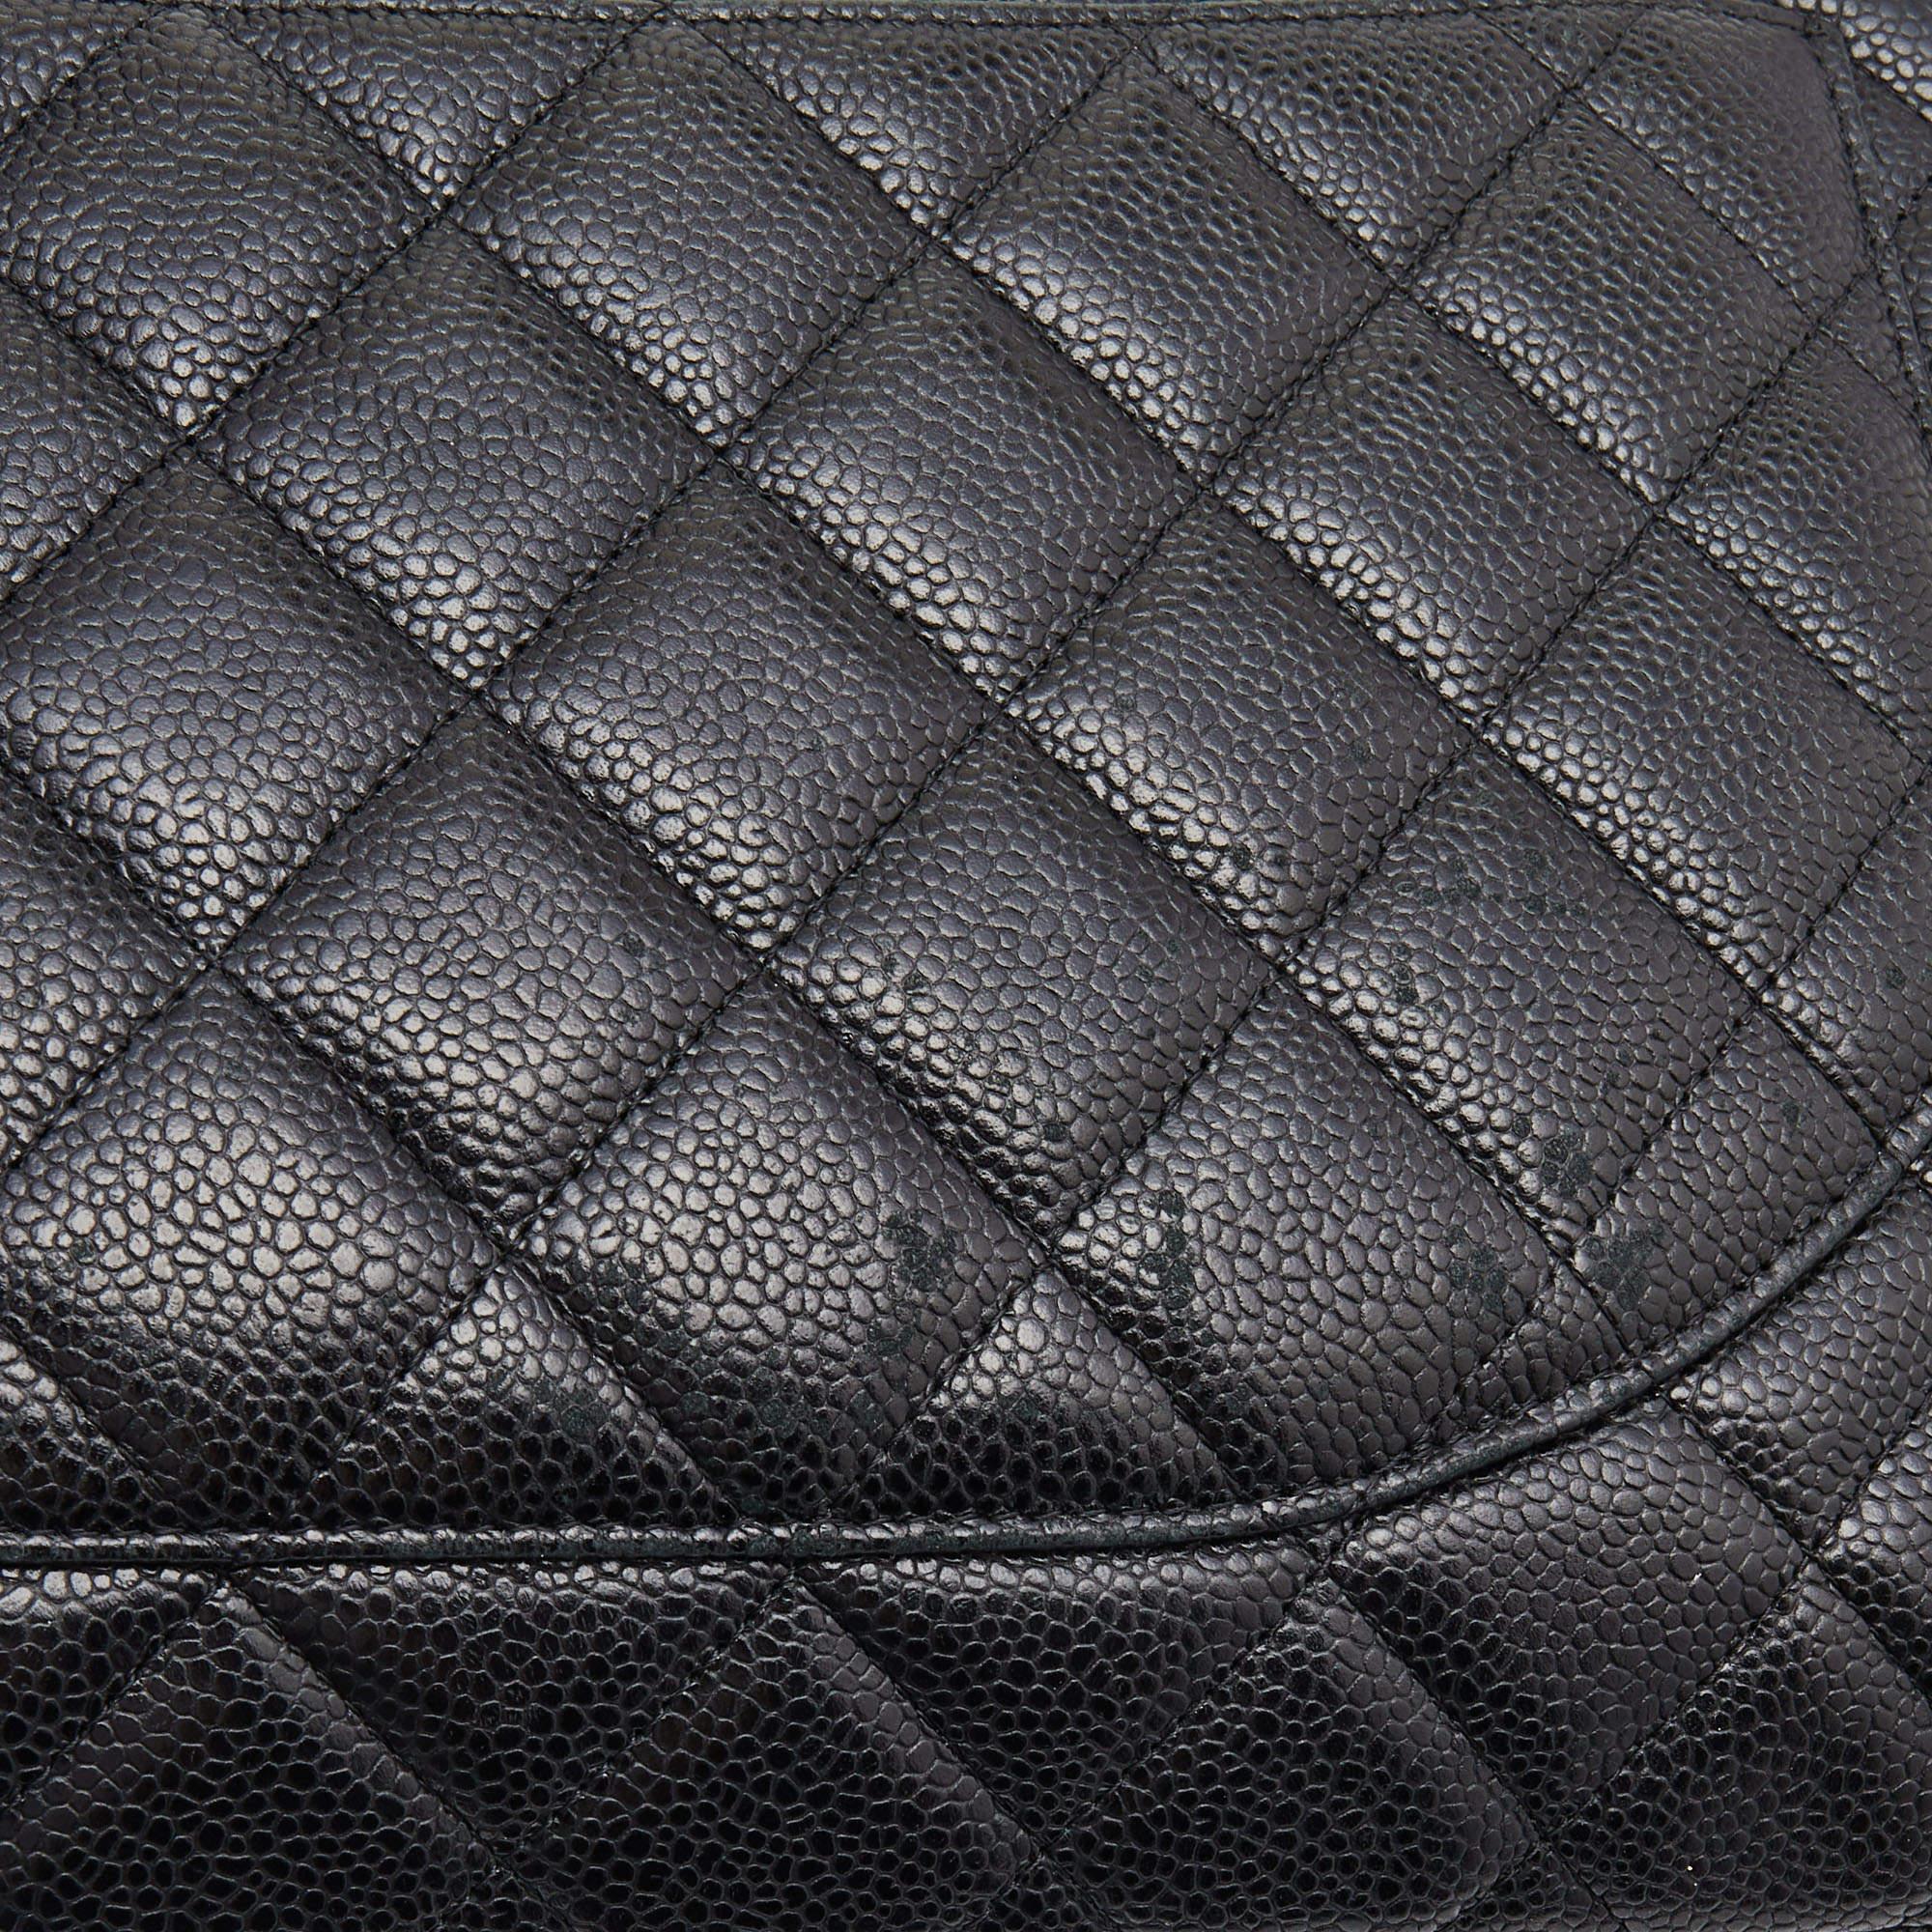 Chanel Black Quilted Caviar Leather Maxi Classic Single Flap Bag For Sale 3